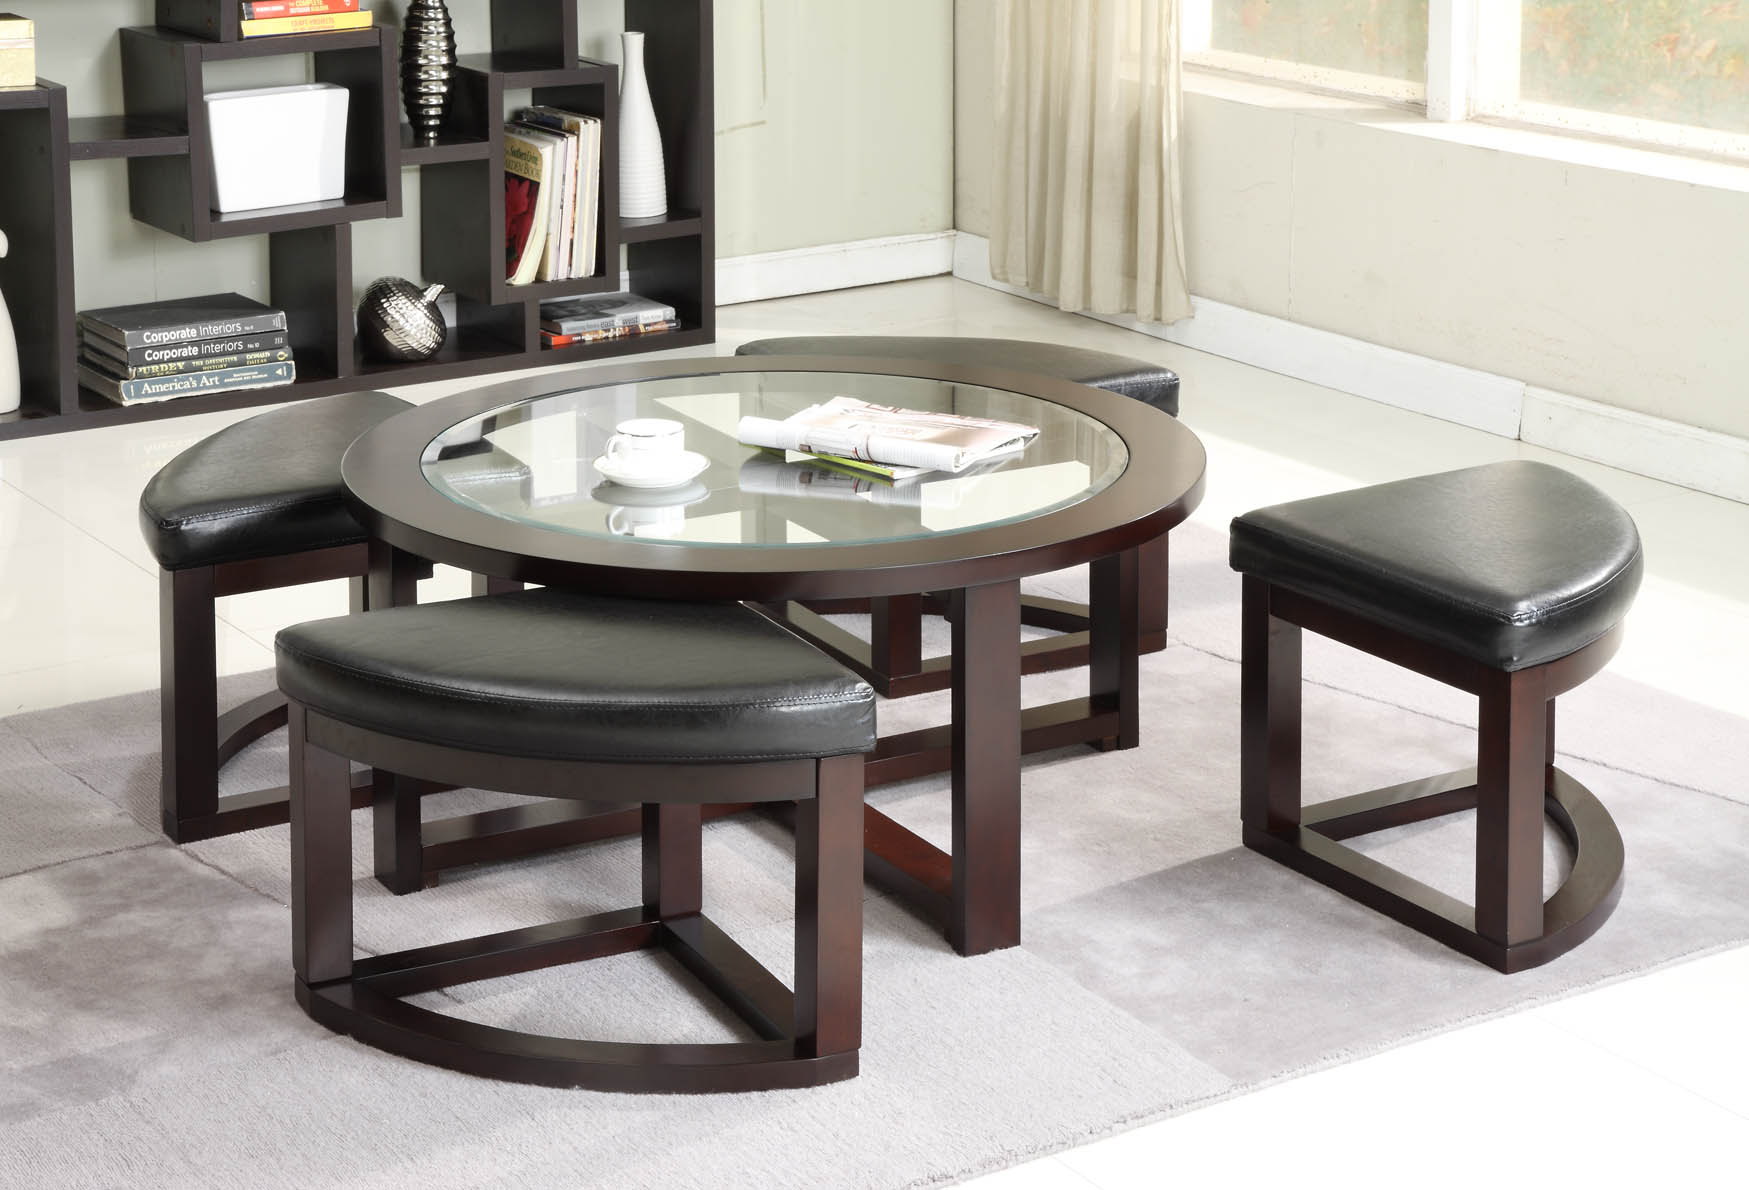 40" Round Coffee Table with 4 Wedge Stools - Espresso Finish